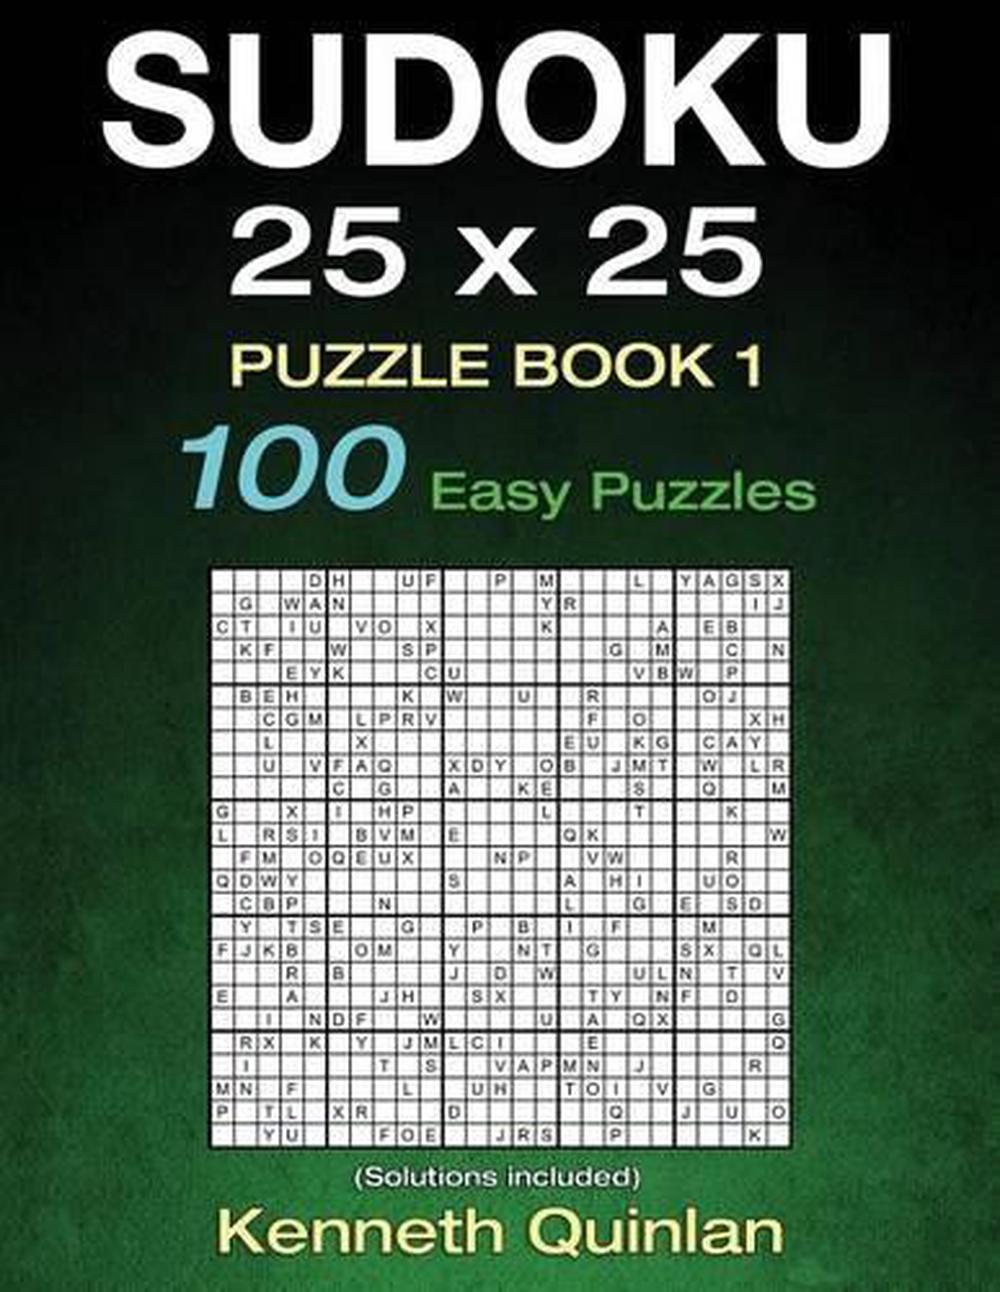 sudoku-25-x-25-puzzle-book-1-100-easy-puzzles-by-kenneth-quinlan